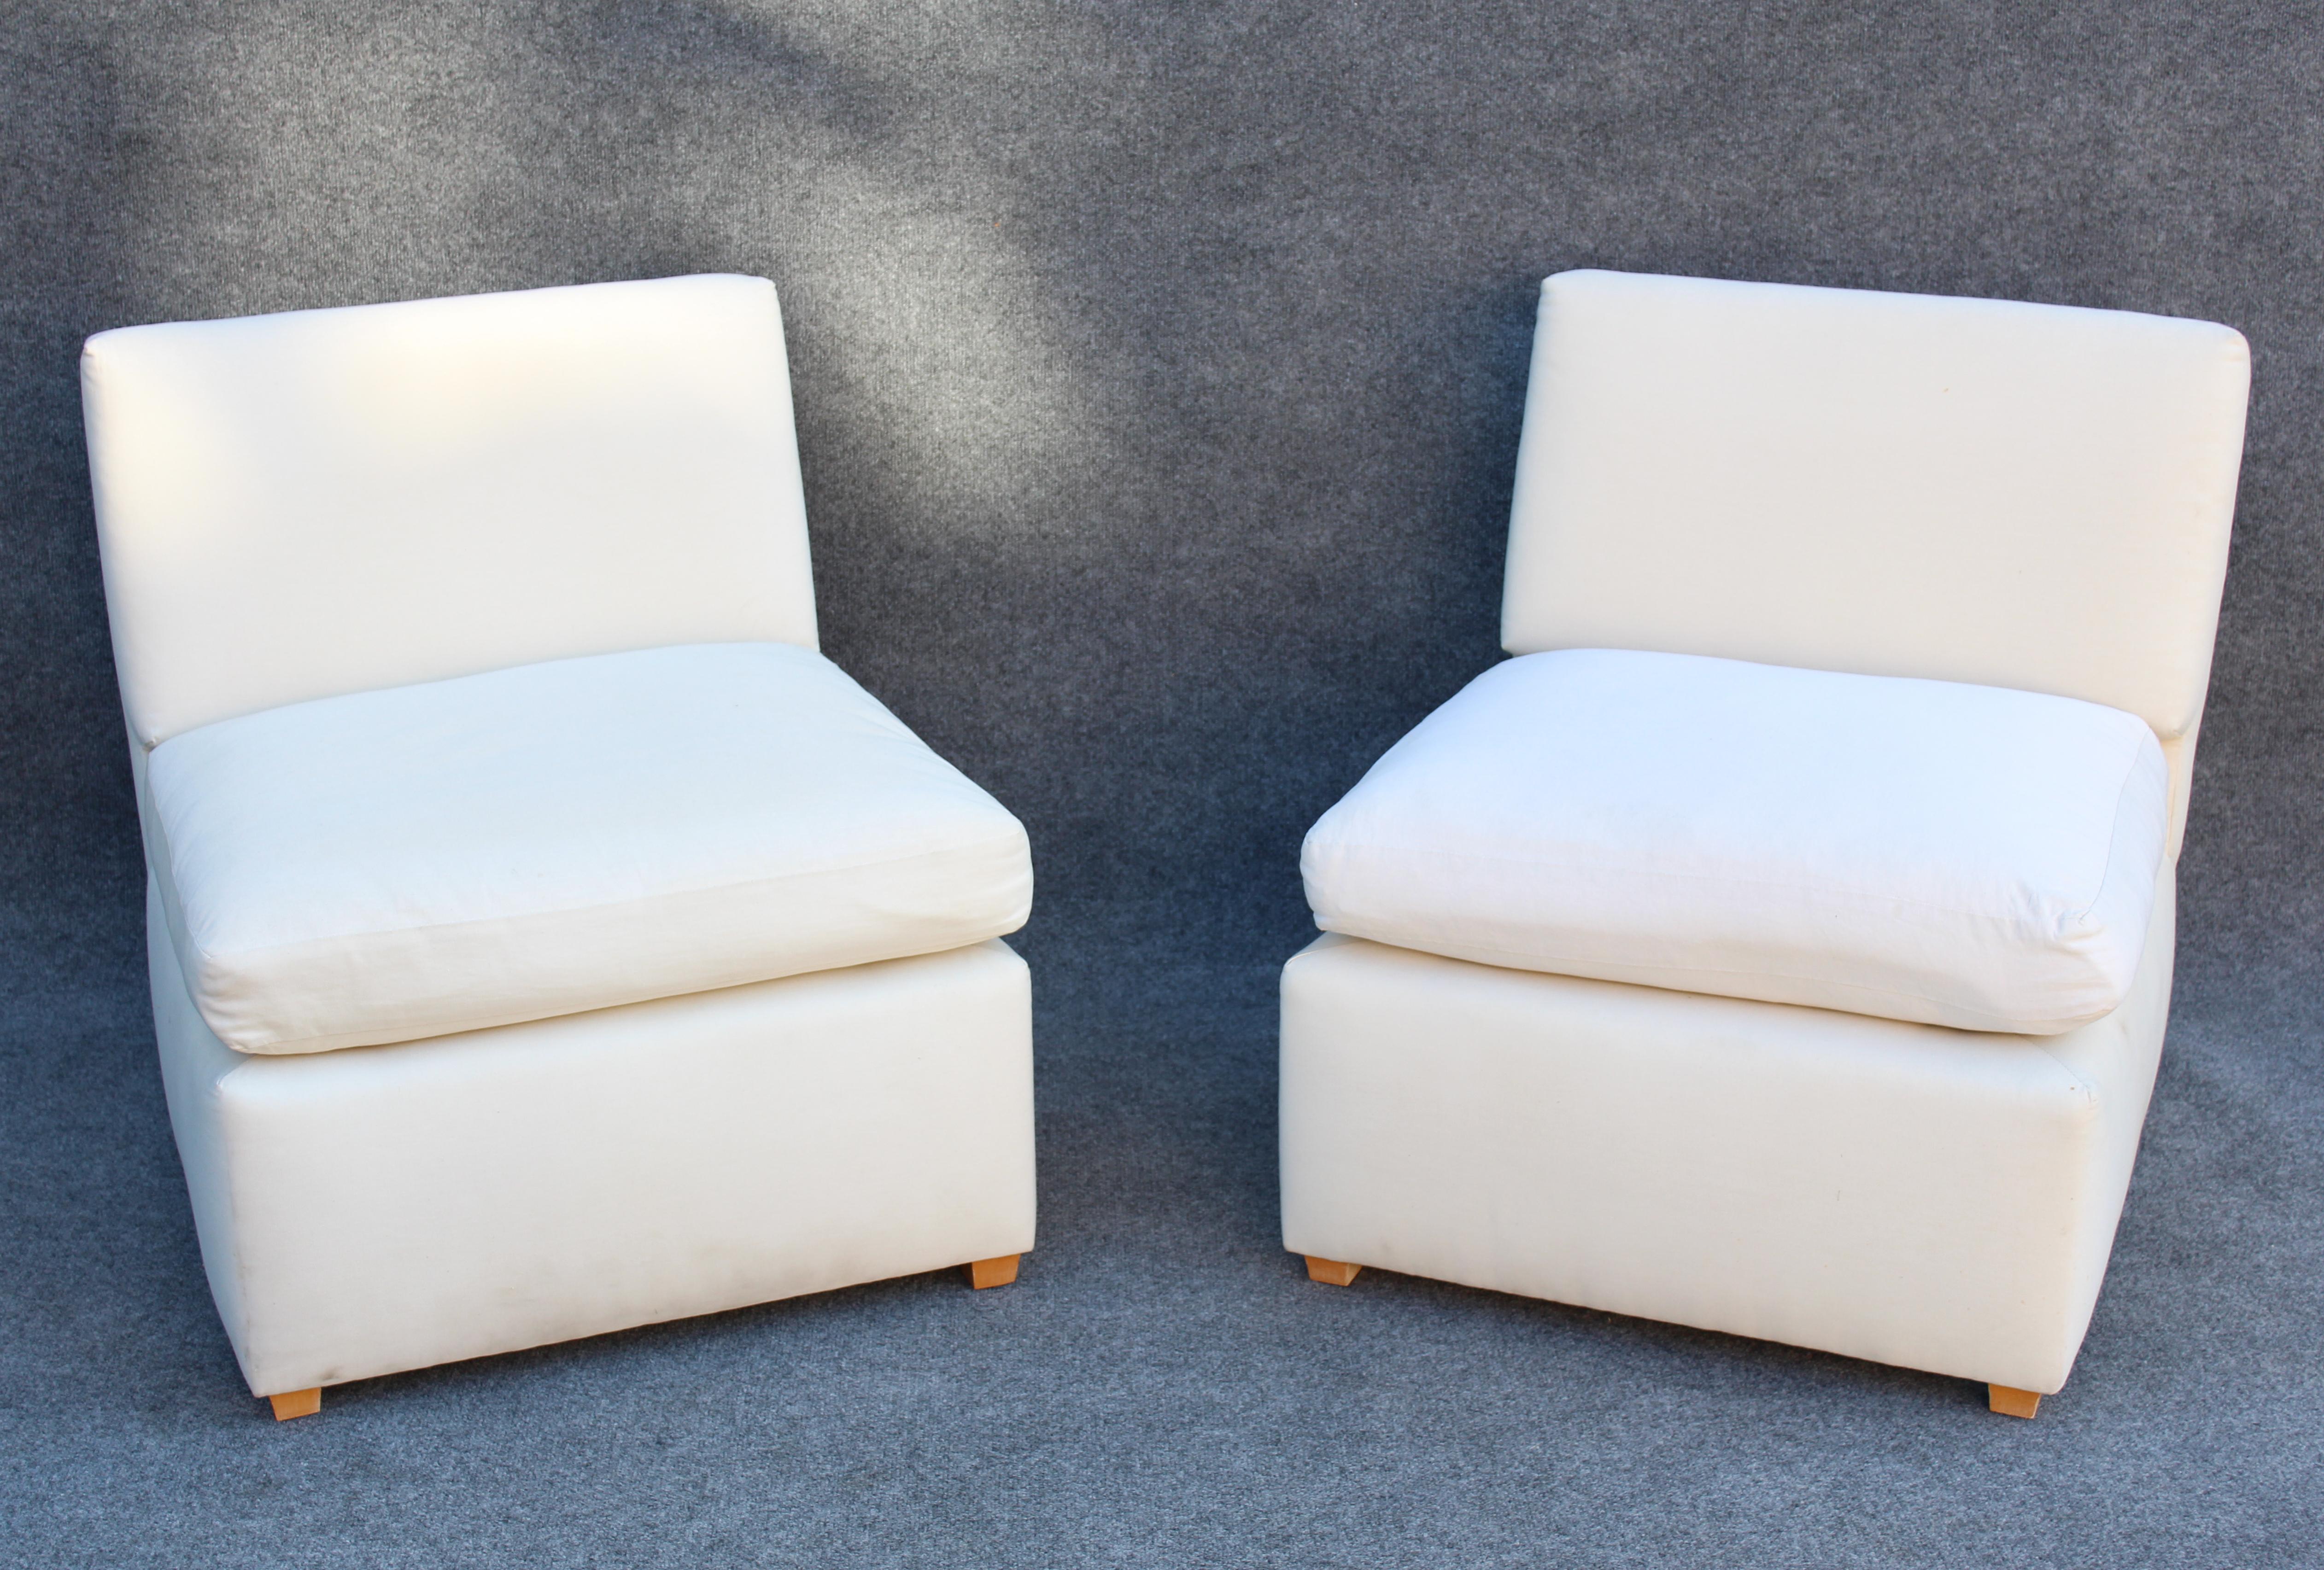 Designed by Billy Baldwin in the 1980s, these rarely signed slipper style lounge chairs feature an elegant and simplistic design language with a crease where the seat meets the back. Upholstered in a pleasant white, each chair has a soft cushion